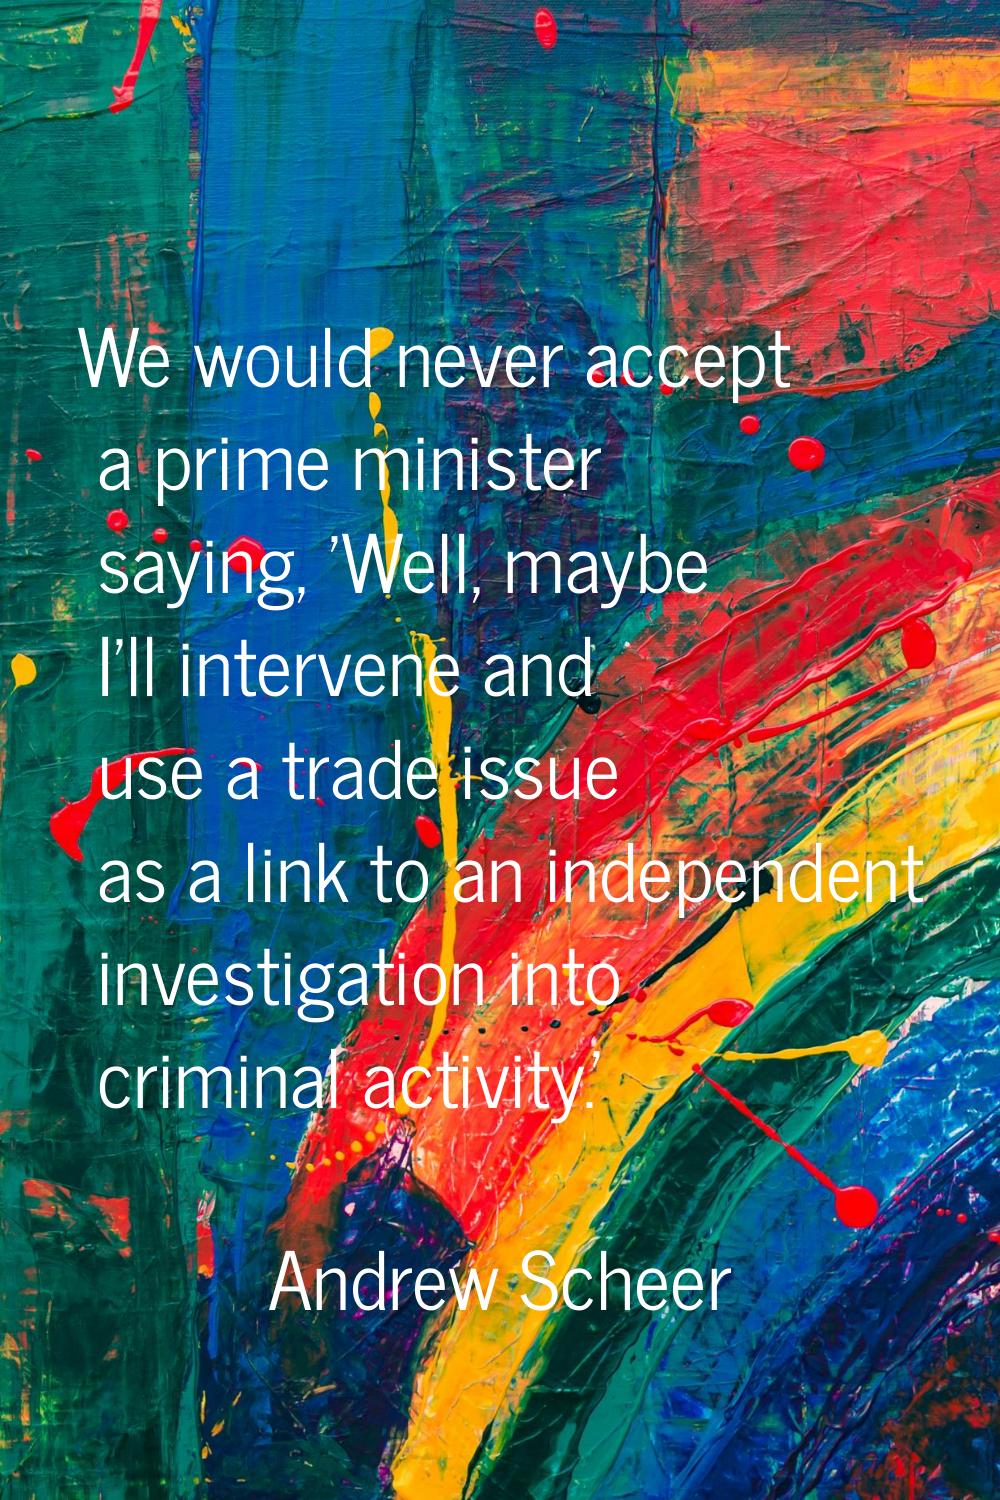 We would never accept a prime minister saying, 'Well, maybe I'll intervene and use a trade issue as